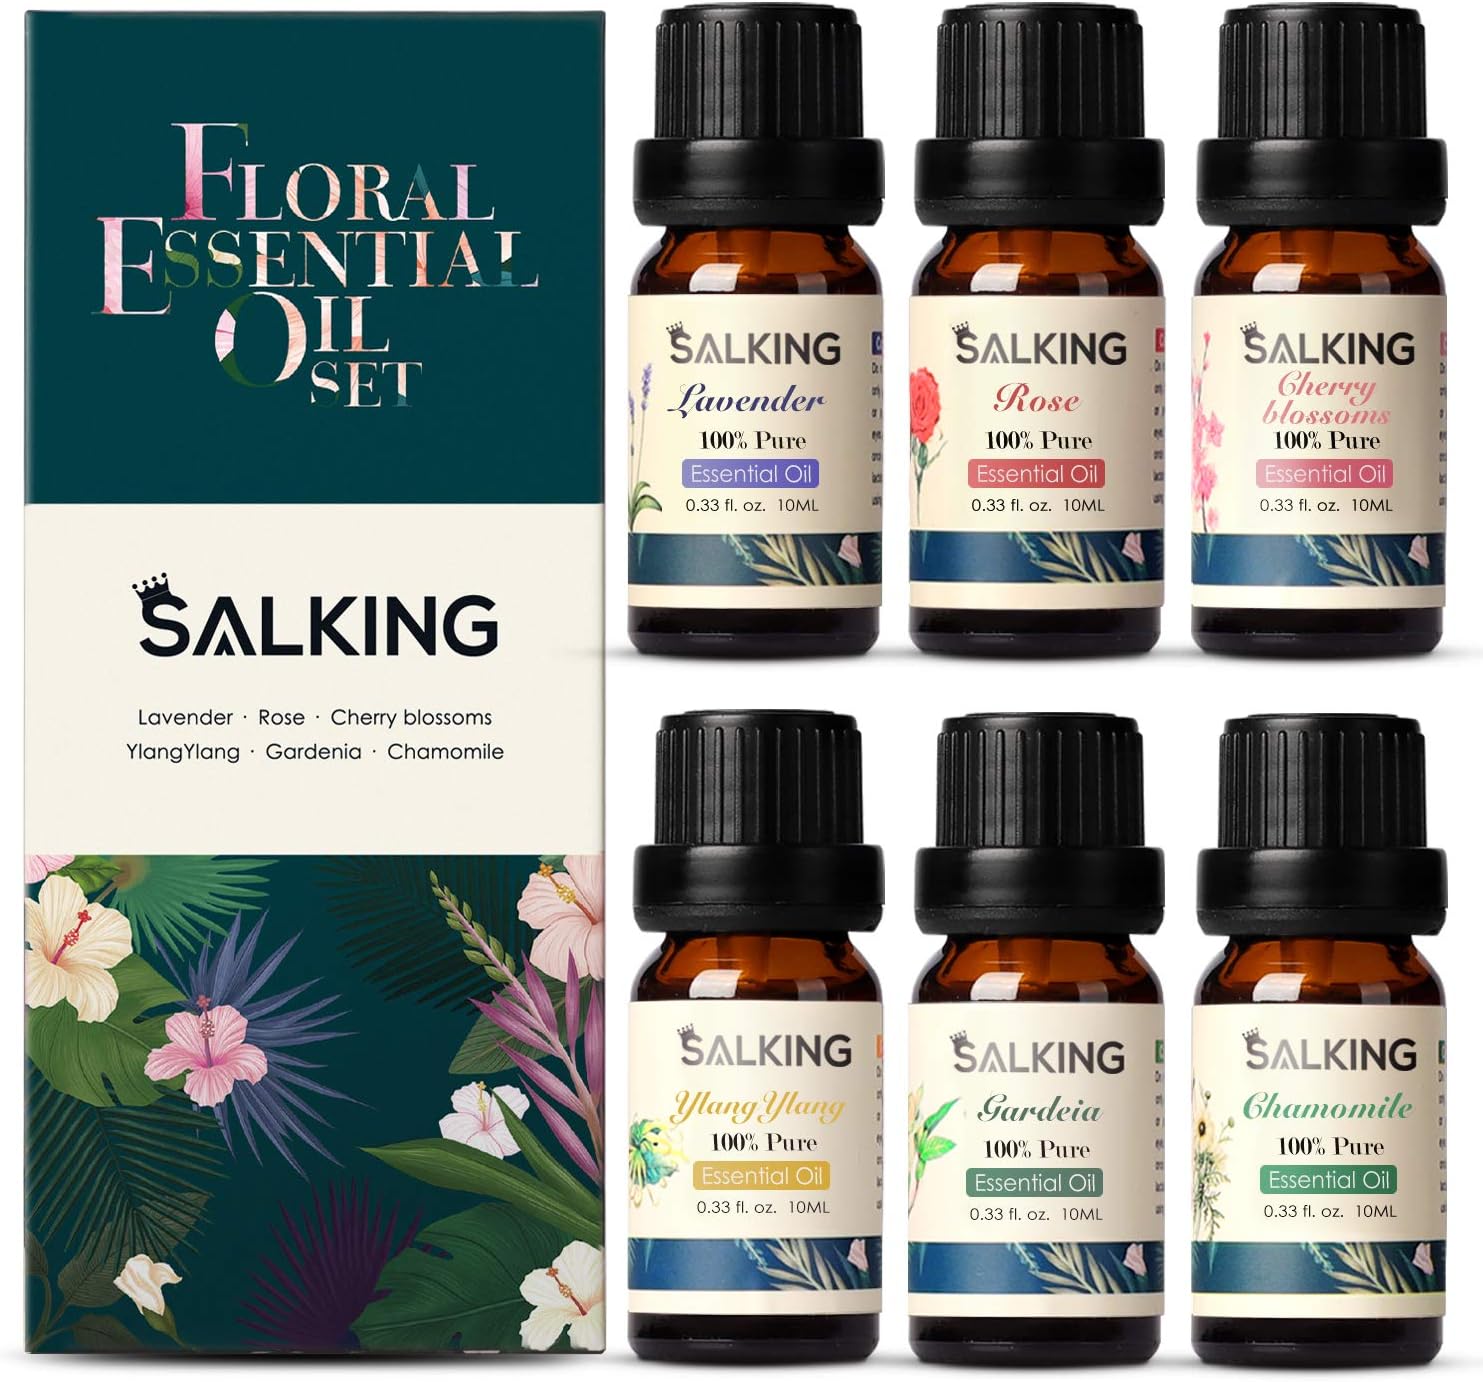 I took a chance on these essential oils because I wanted to find floral scents that were high quality and different from the typical essential oils such as lavender, eucalyptus, etc. These floral scents are amazing! Their aromas are concentrated enough that it is perfect for diffusers or if you used a drop or two or three just to enhance a room with homemade room spray. All of the scents are pleasing, especially if you are into florals. Definitely recommend!